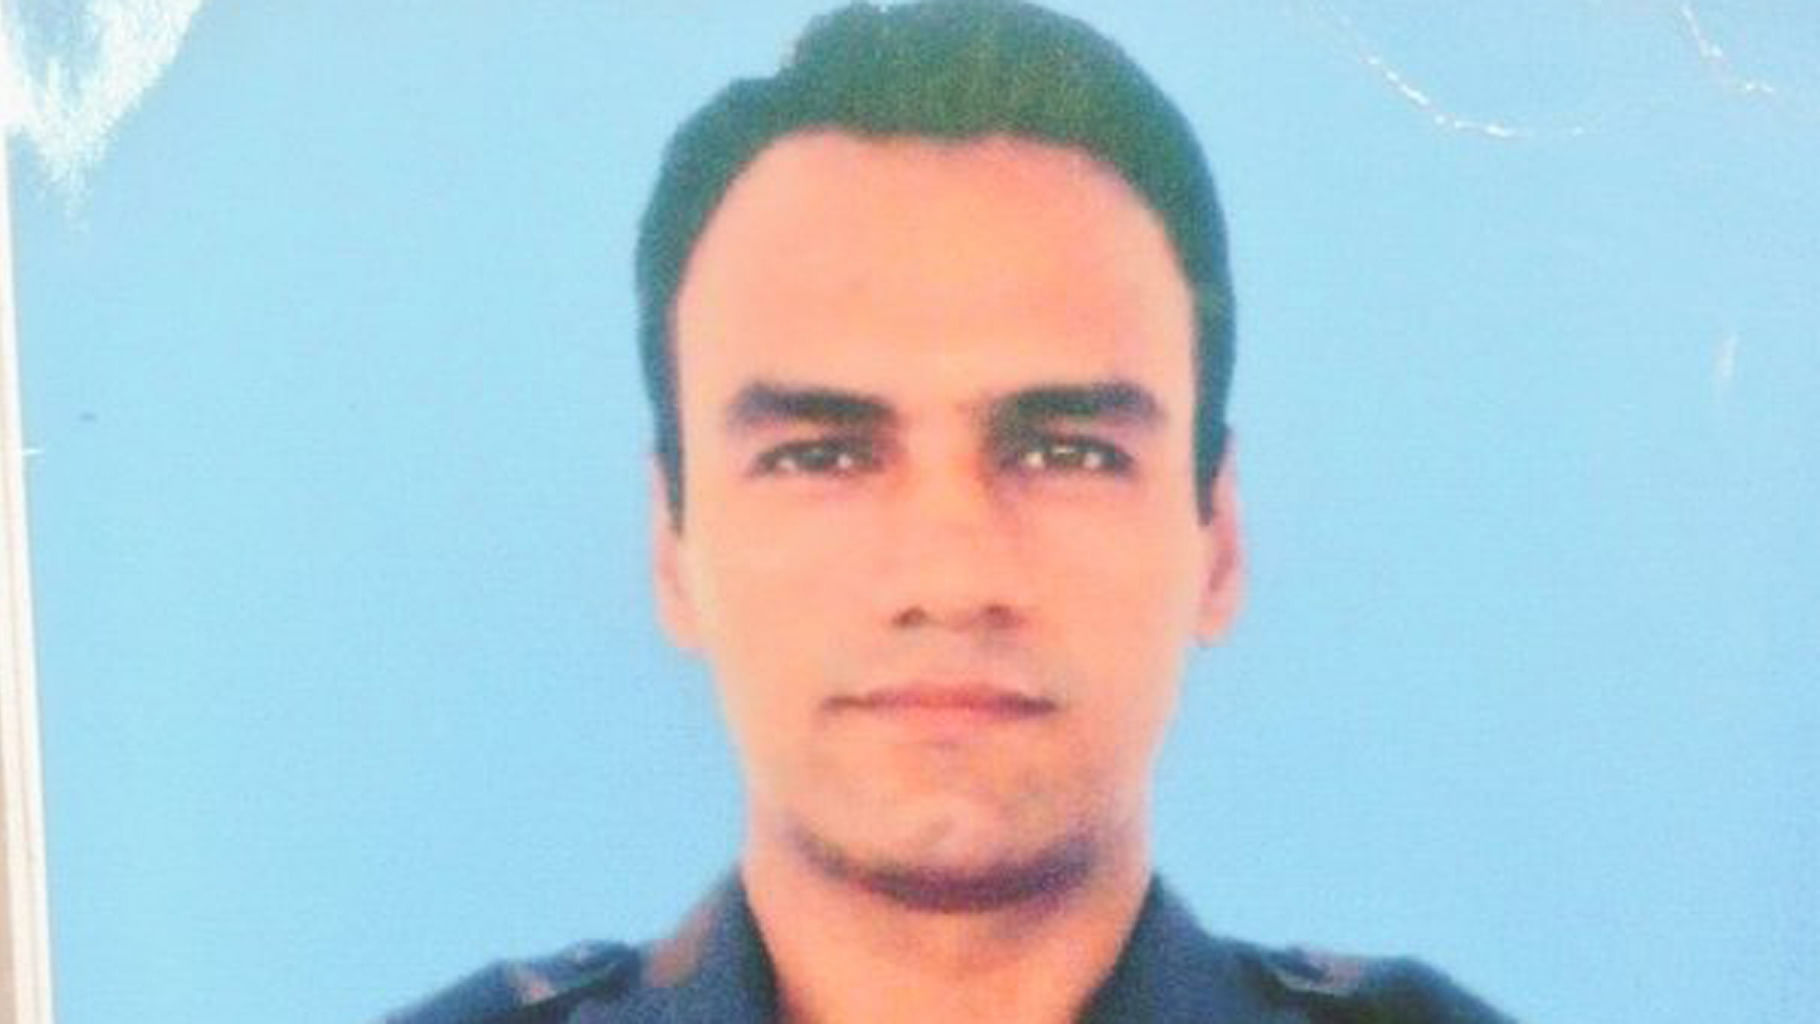 Major Amit Deswal who was killed by ZUF militants on Wednesday. (Photo Courtesy: Twitter/@<a href="https://twitter.com/ShivAroor/status/720310385639723009">ShivAroor</a>)